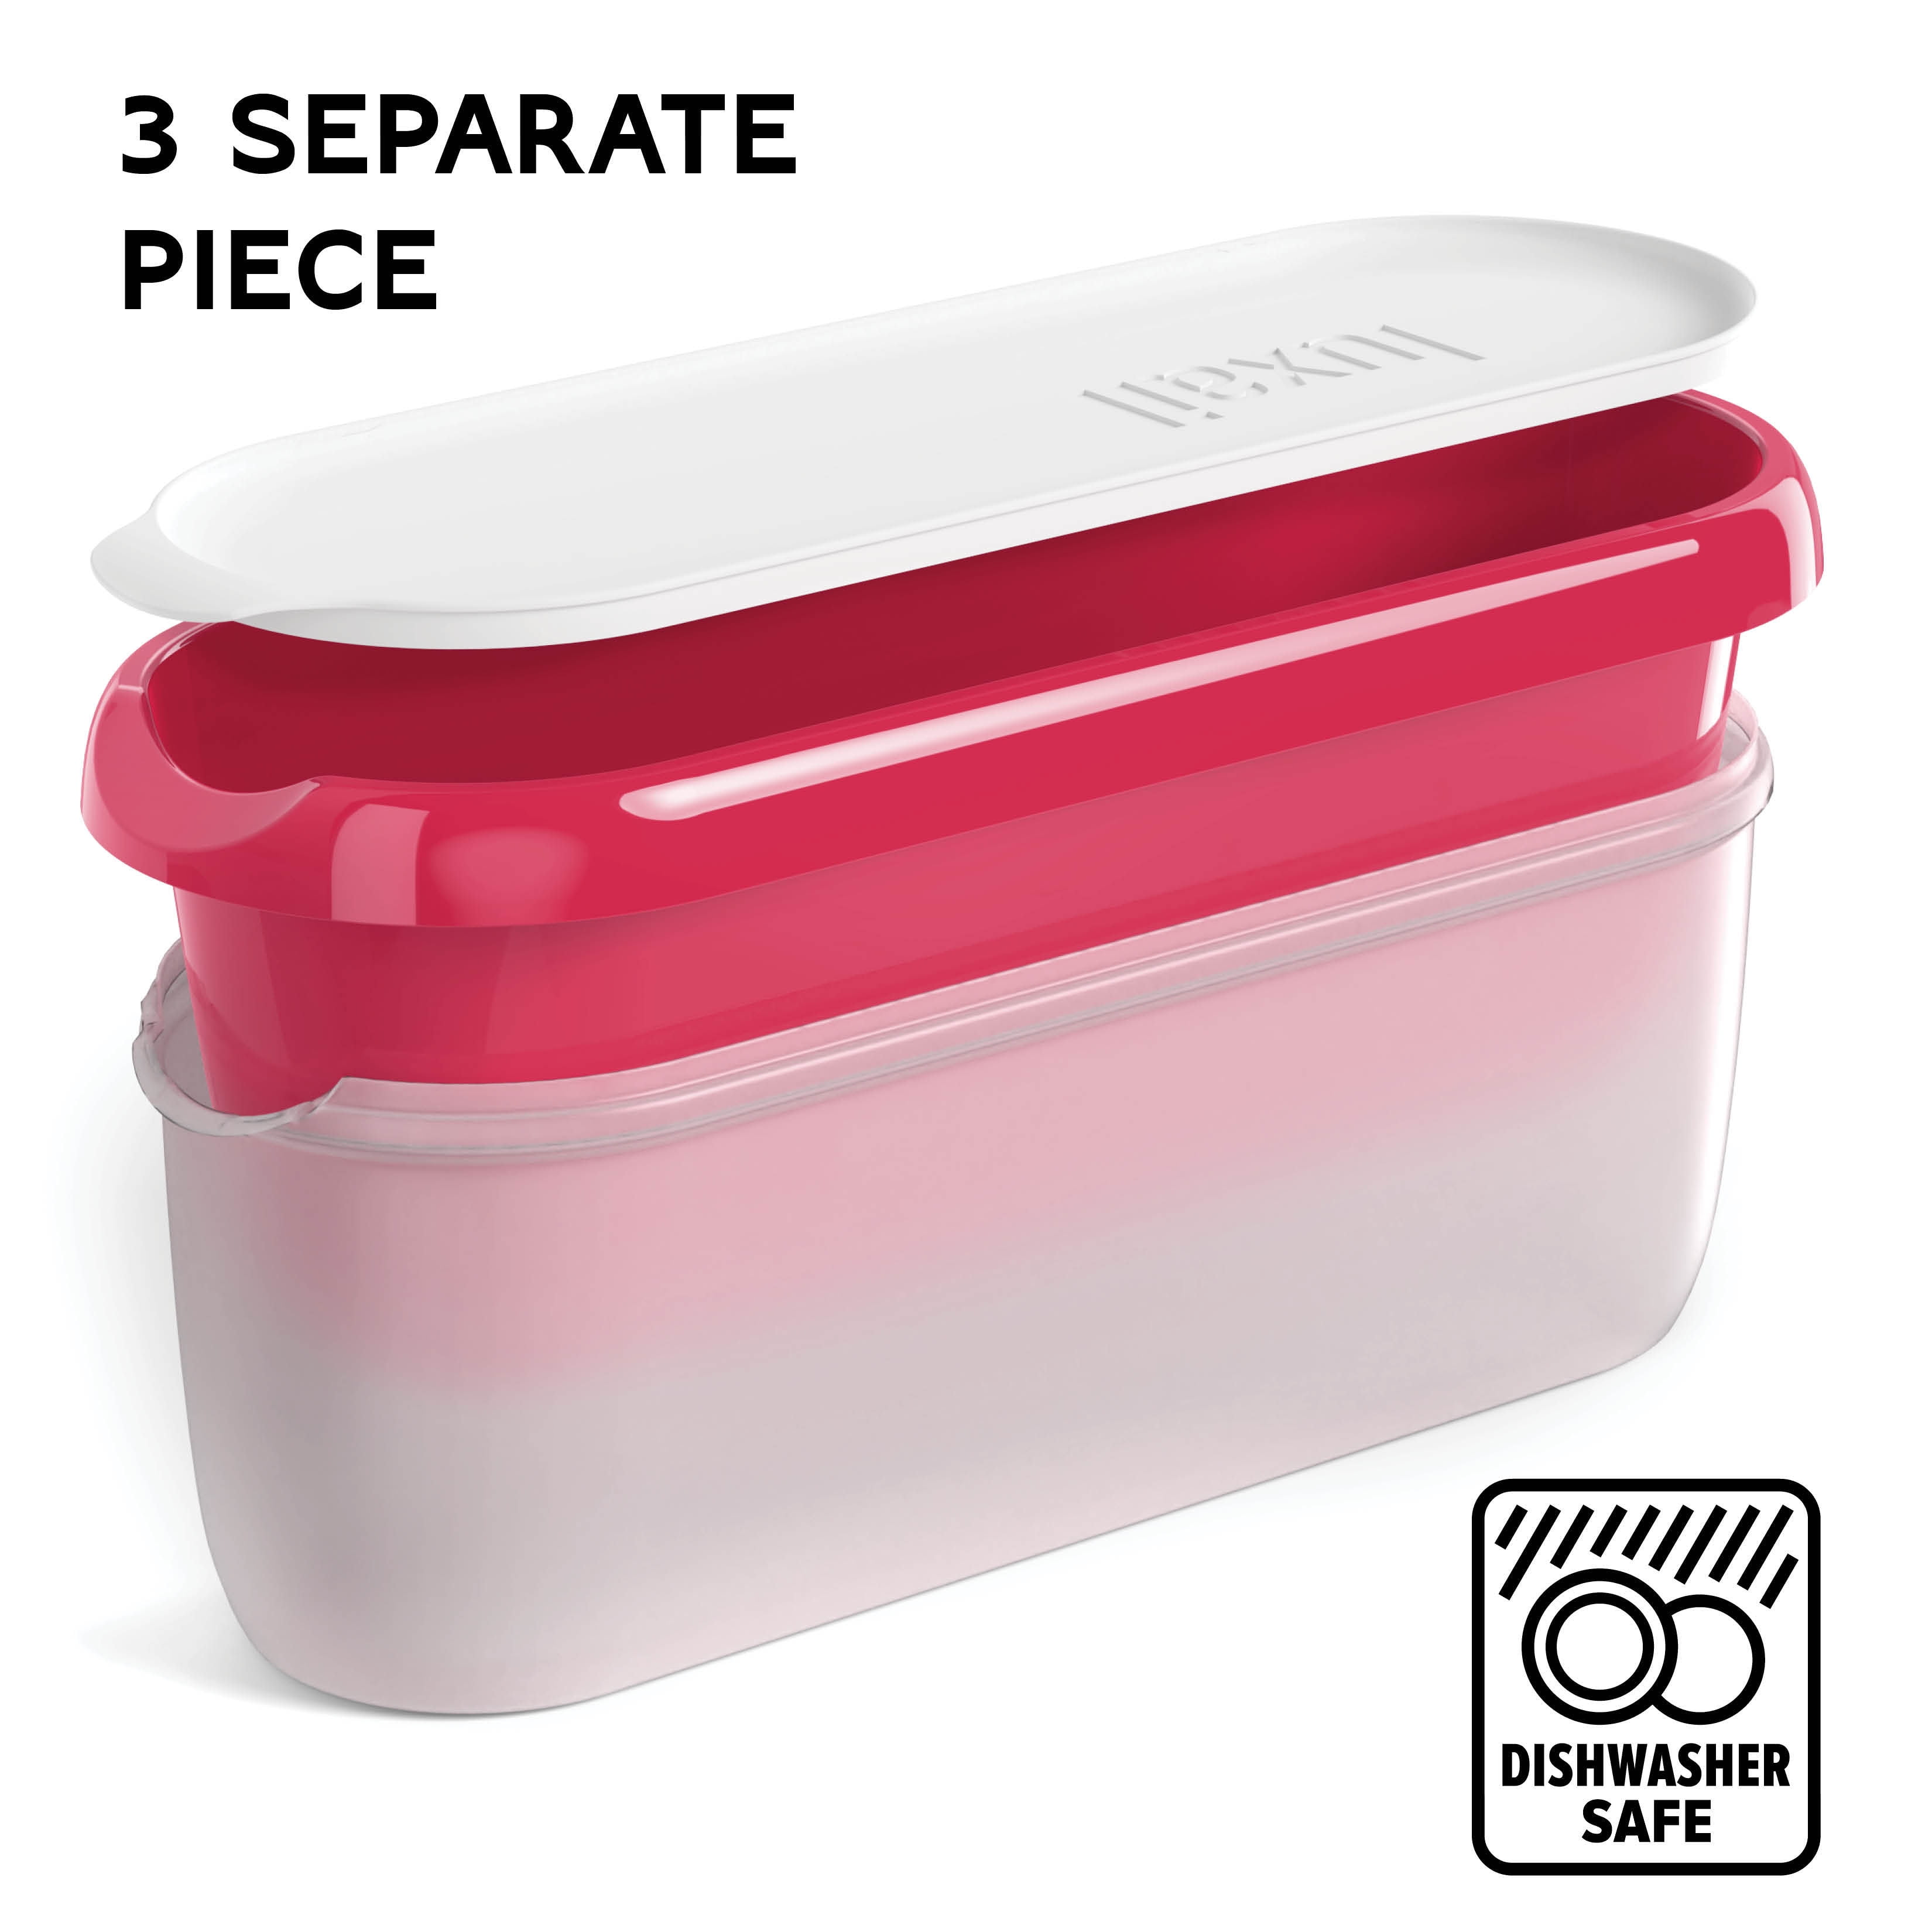 Zulay Kitchen Ice Cream Containers 2 Pack, 1 Quart- Red, 2